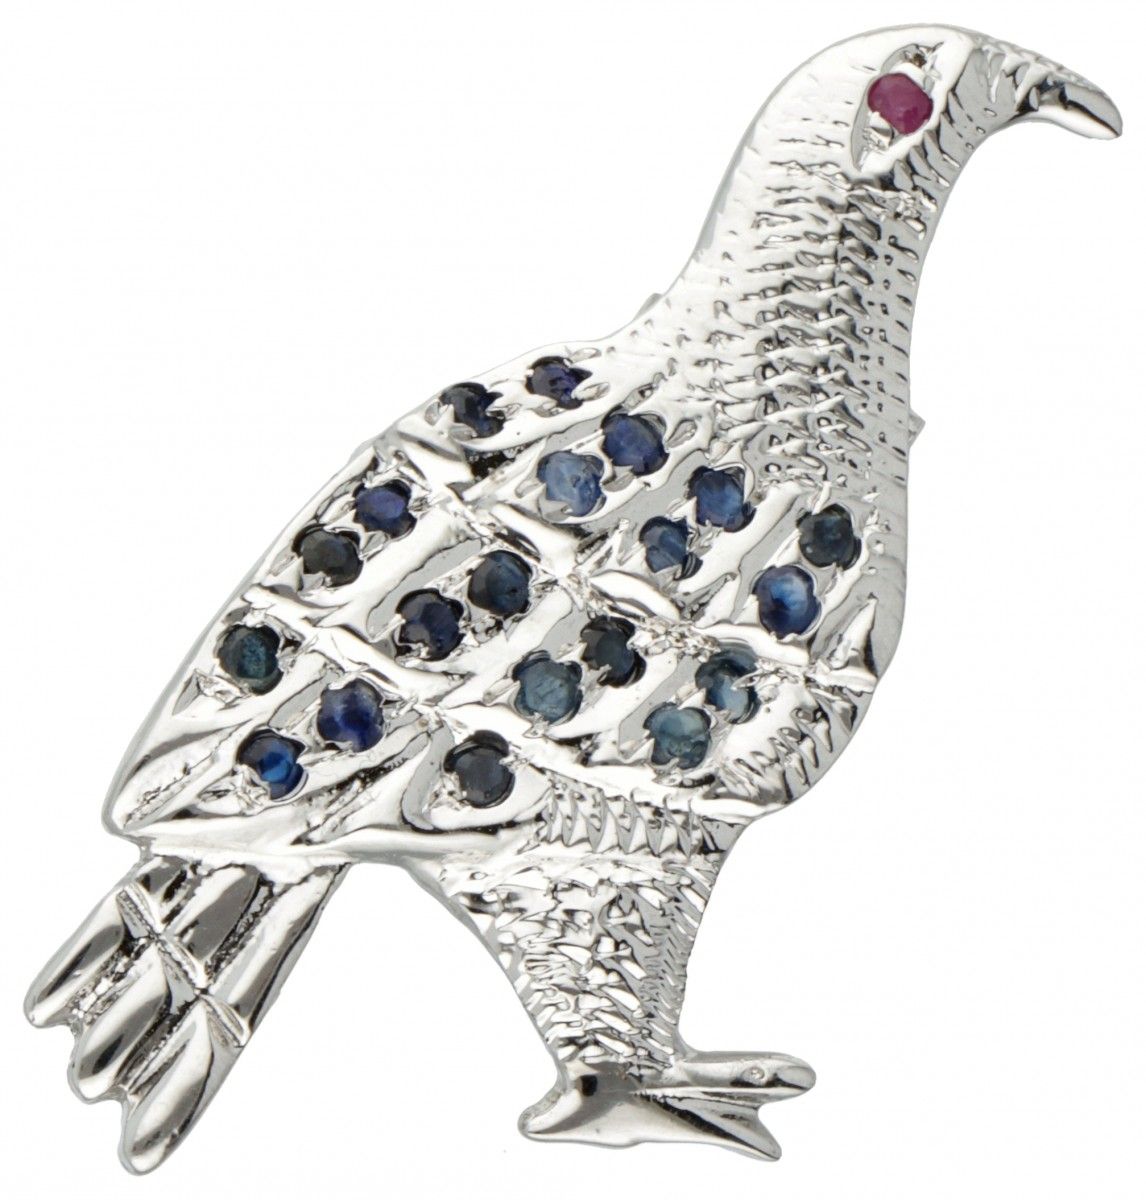 Silver brooch of a bird set with sapphire and ruby ​​- 800/1000. With faceted sa&hellip;